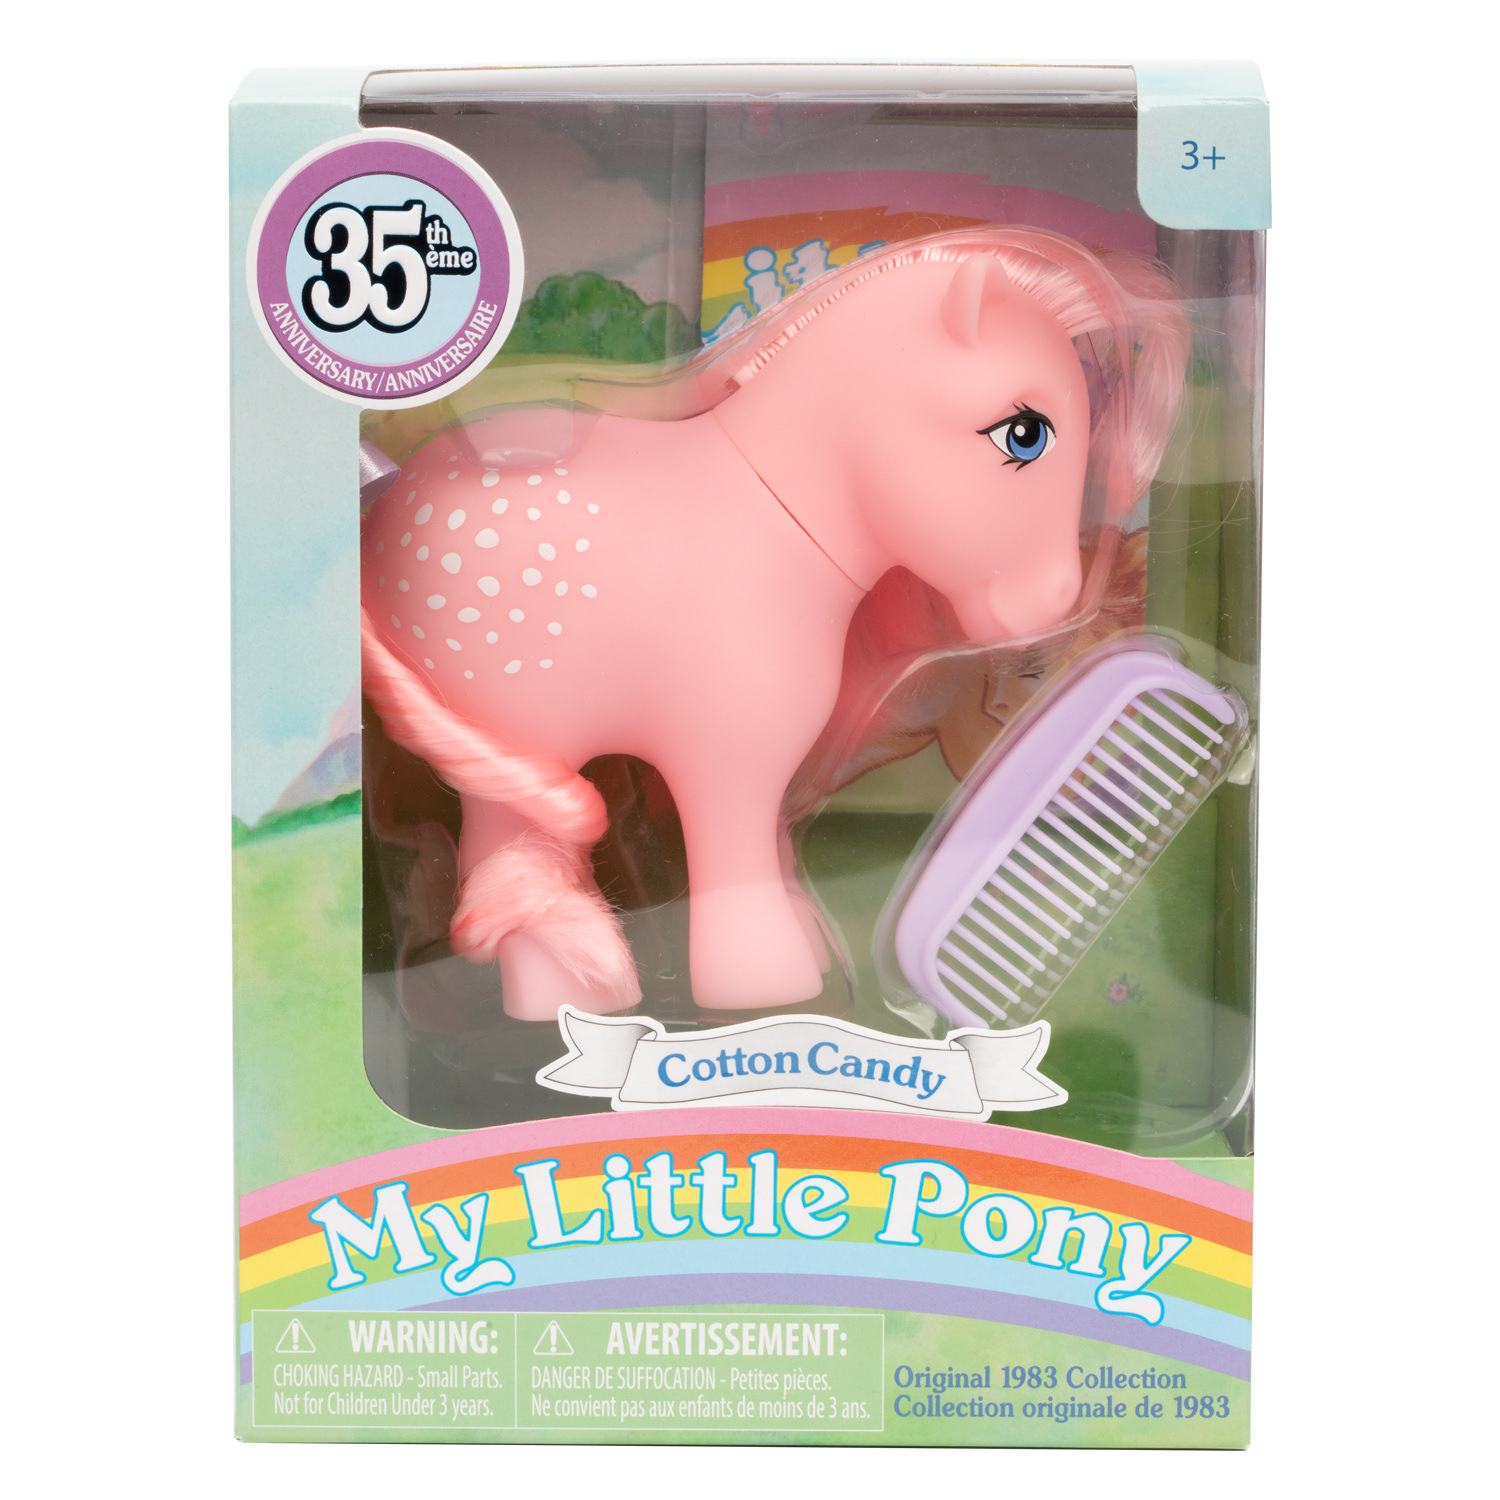 My Little Pony Classic - 35th Anniversary Collector Pony - Cotton Candy - image 1 of 3